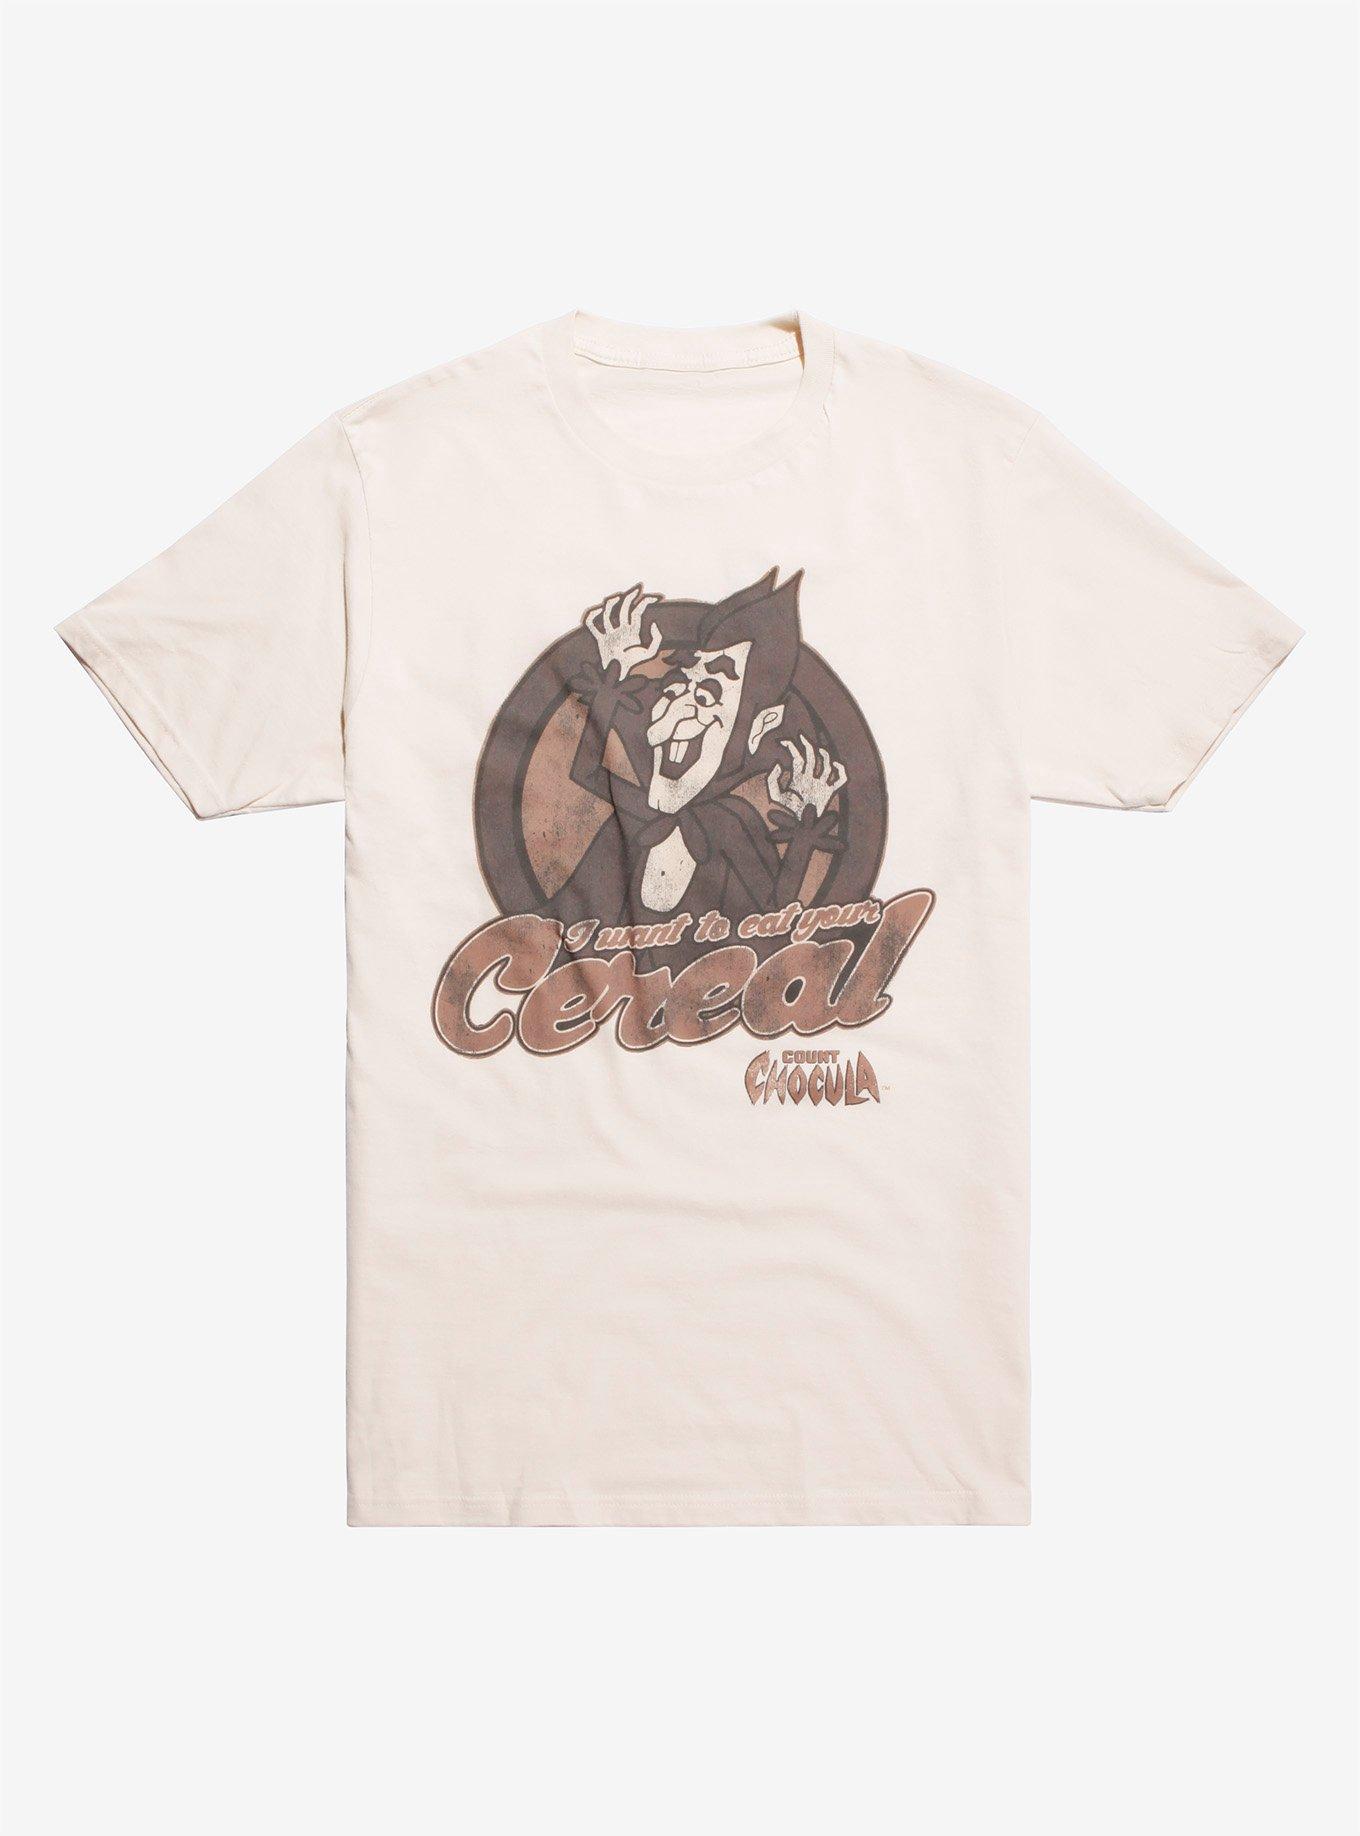 Monster Cereal Count Chocula T-Shirt, BROWN, hi-res